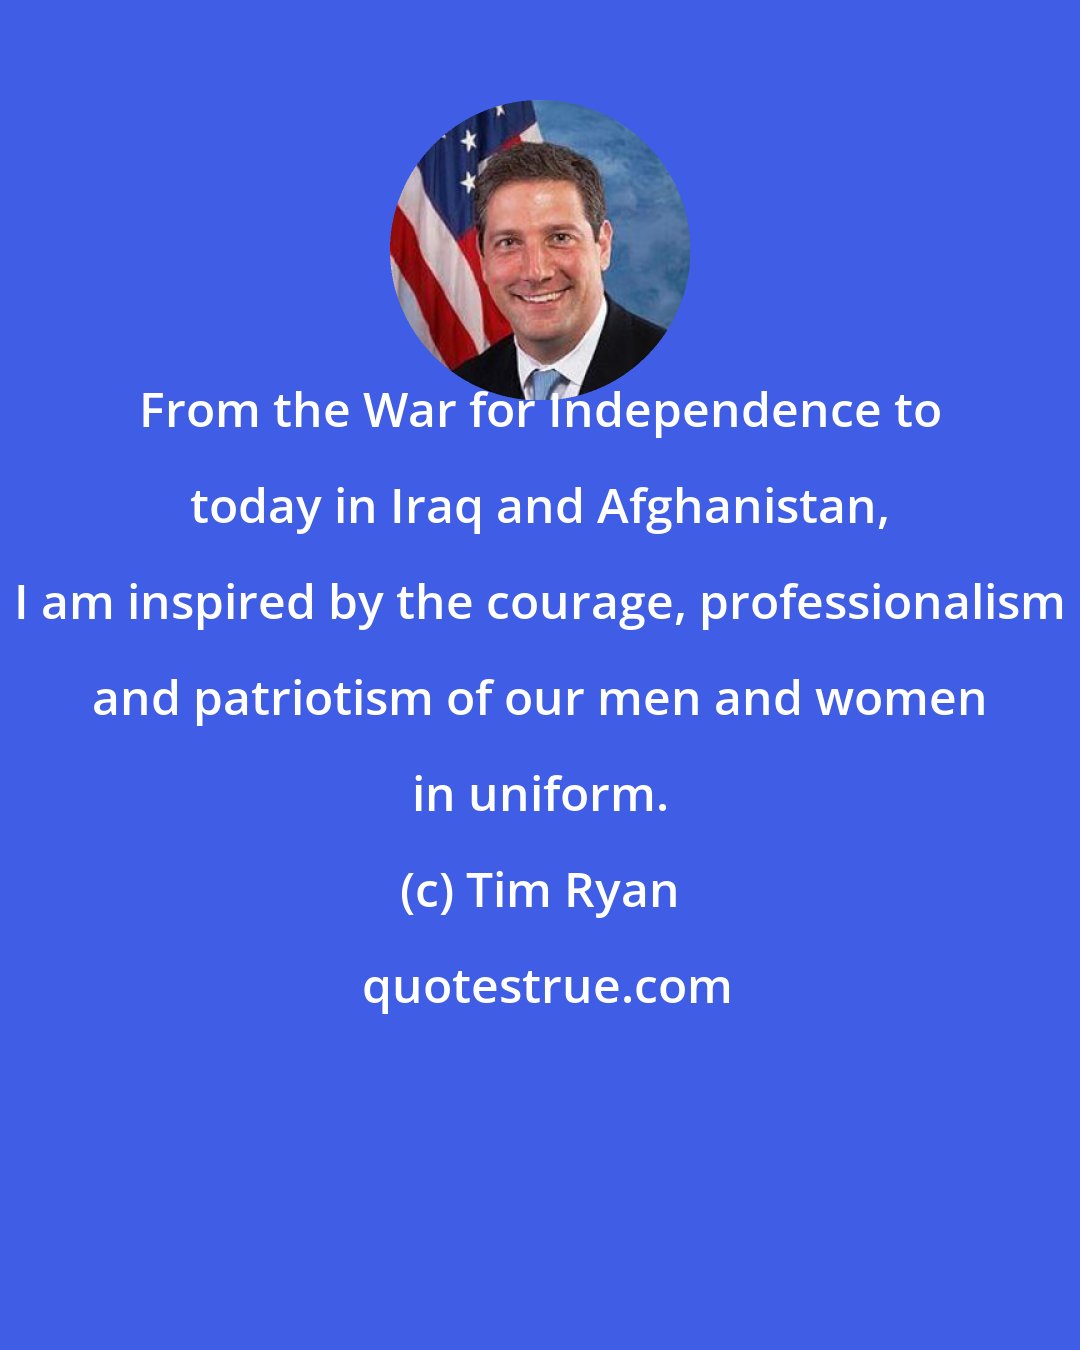 Tim Ryan: From the War for Independence to today in Iraq and Afghanistan, I am inspired by the courage, professionalism and patriotism of our men and women in uniform.